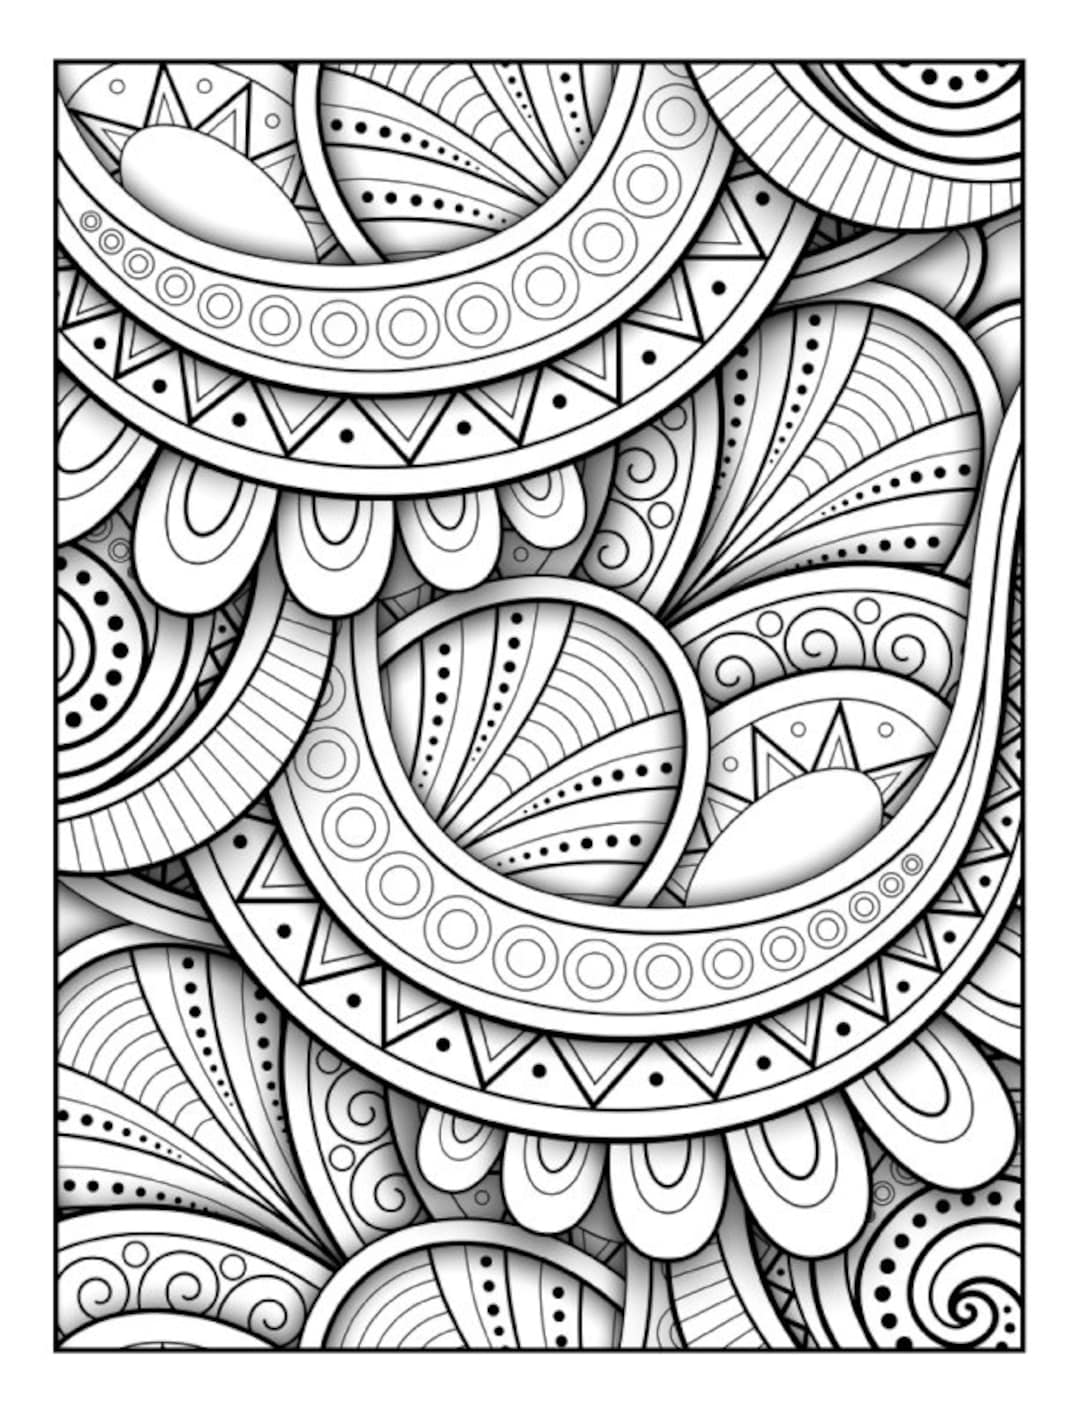 Stunning patterns adult coloring book mandala coloring pages stress relieving mandala style patterns